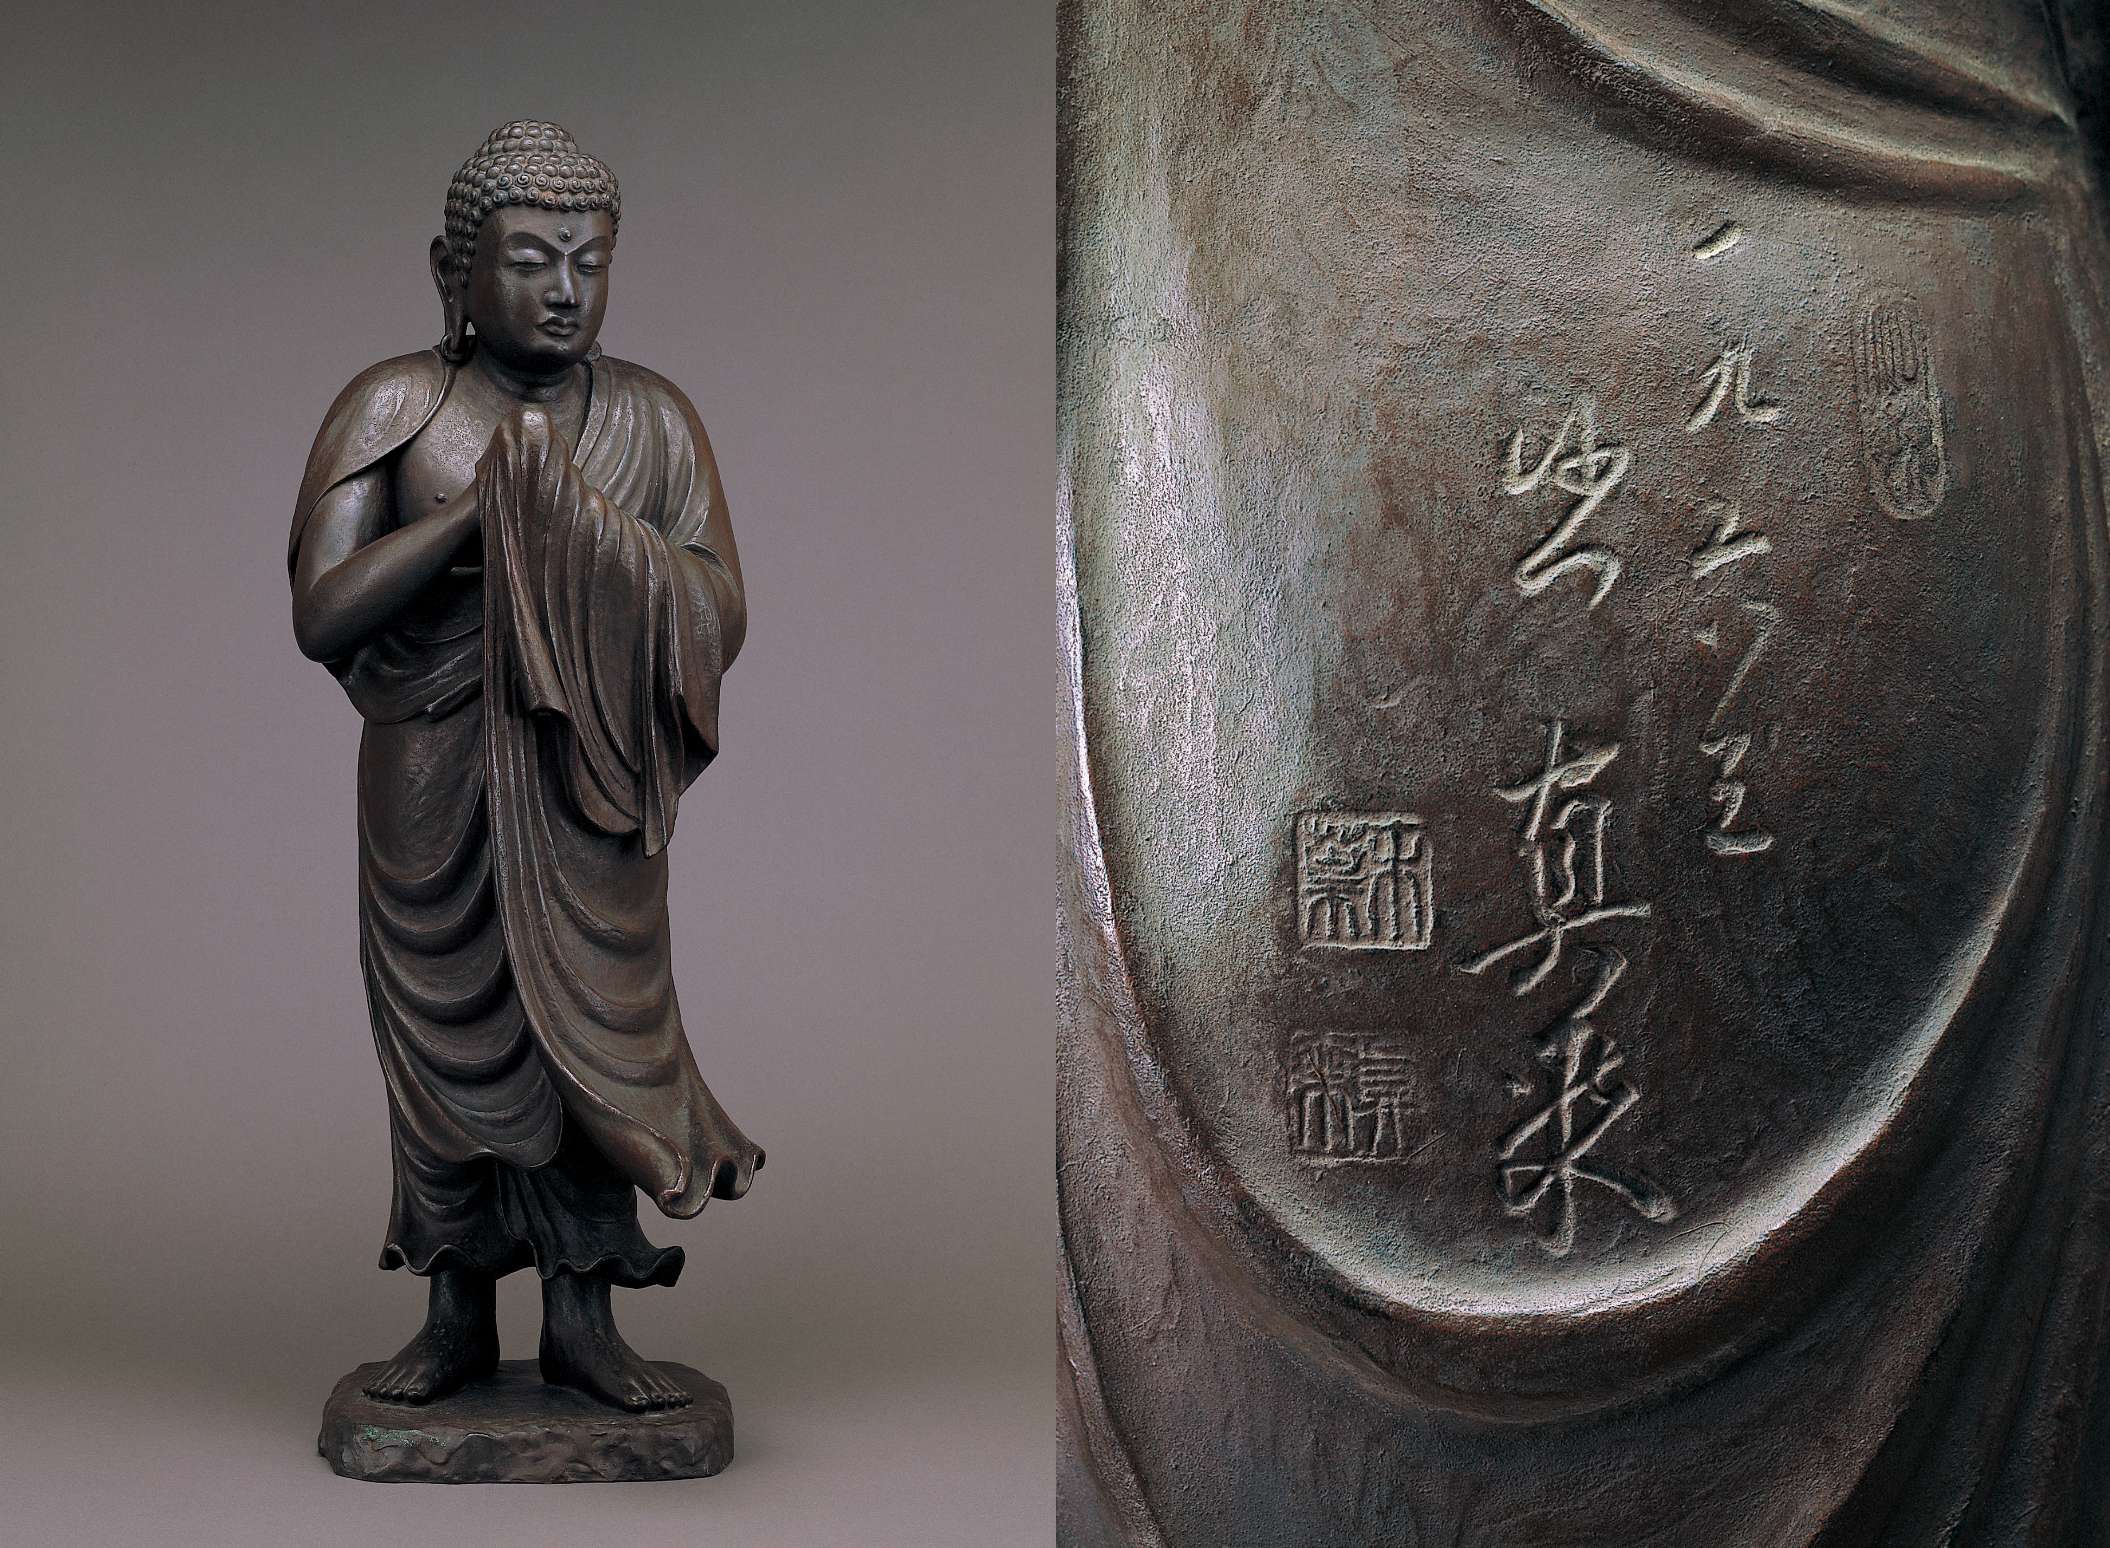 A dark-hued matte statue of barefoot, standing Buddha, gaze turned slightly aside as if giving attention to someone; the movement of robes draped over hands in prayer gesture suggest a windy scene (left). A close-up of the back of the statue showing Japanese calligraphy and stamps etched into a smooth portion of the metal between the falling drapery of the Buddha’s robes (right).